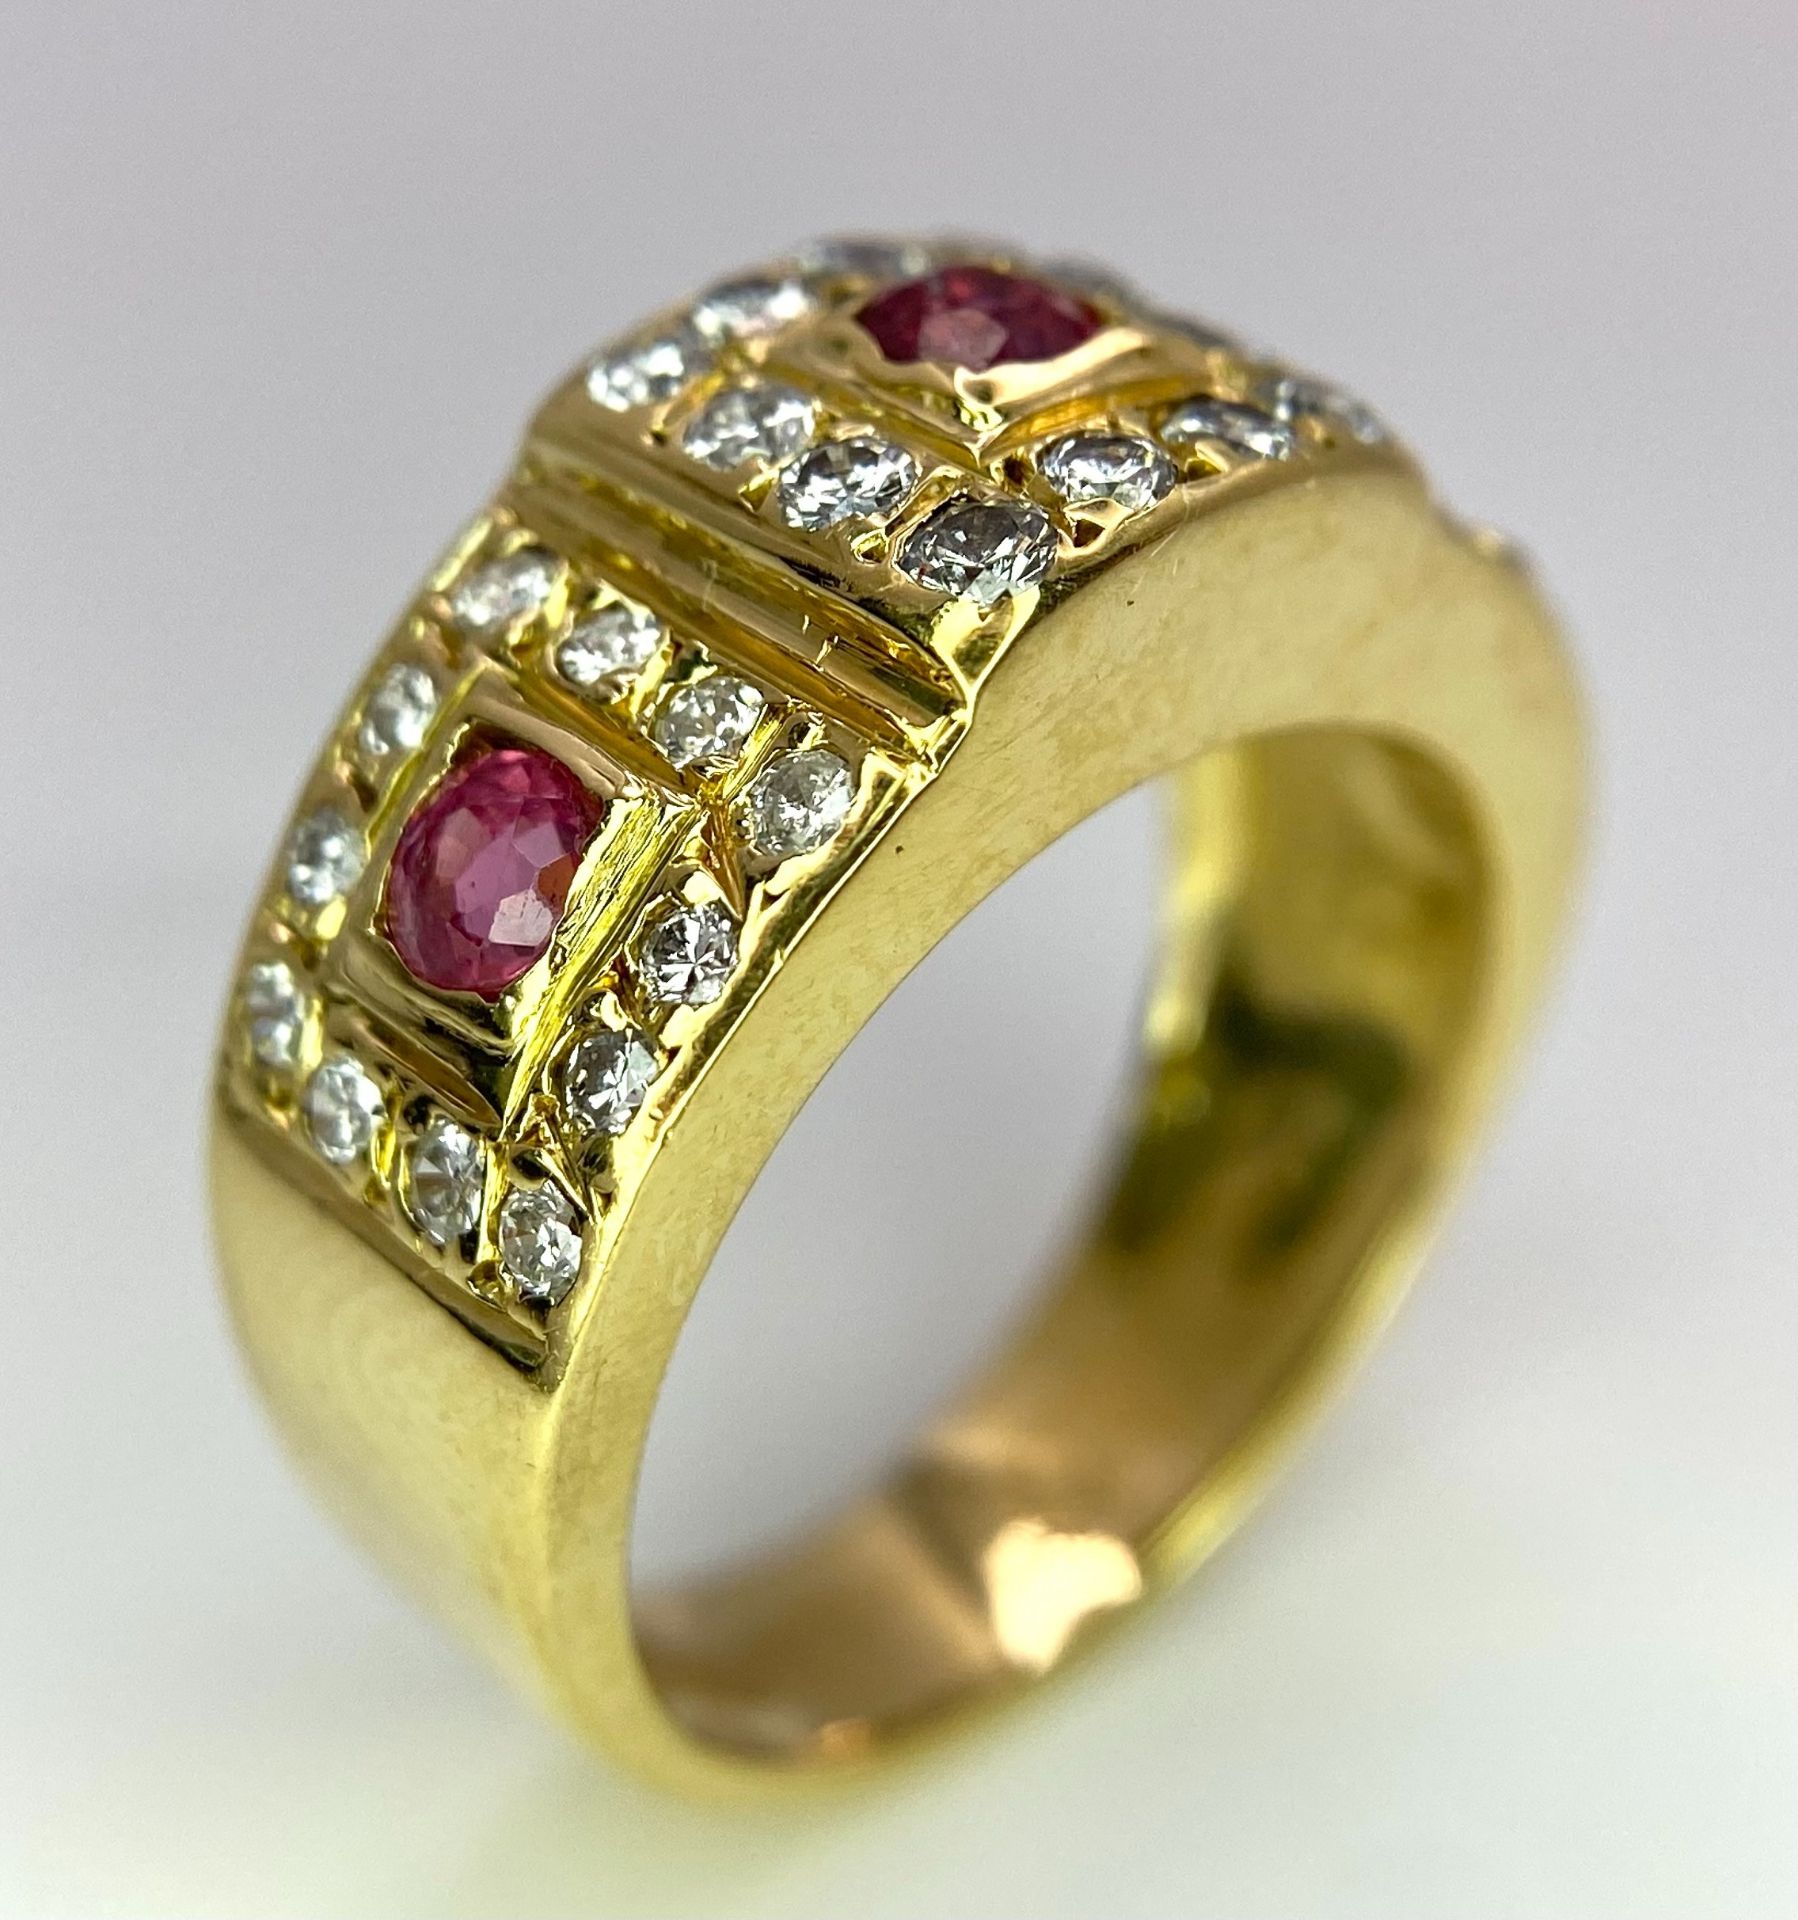 AN 18K YELLOW GOLD DIAMOND & RUBY RING. 0.60ctw, size K, 6.8g total weight. Ref: SC 8072 - Image 6 of 9